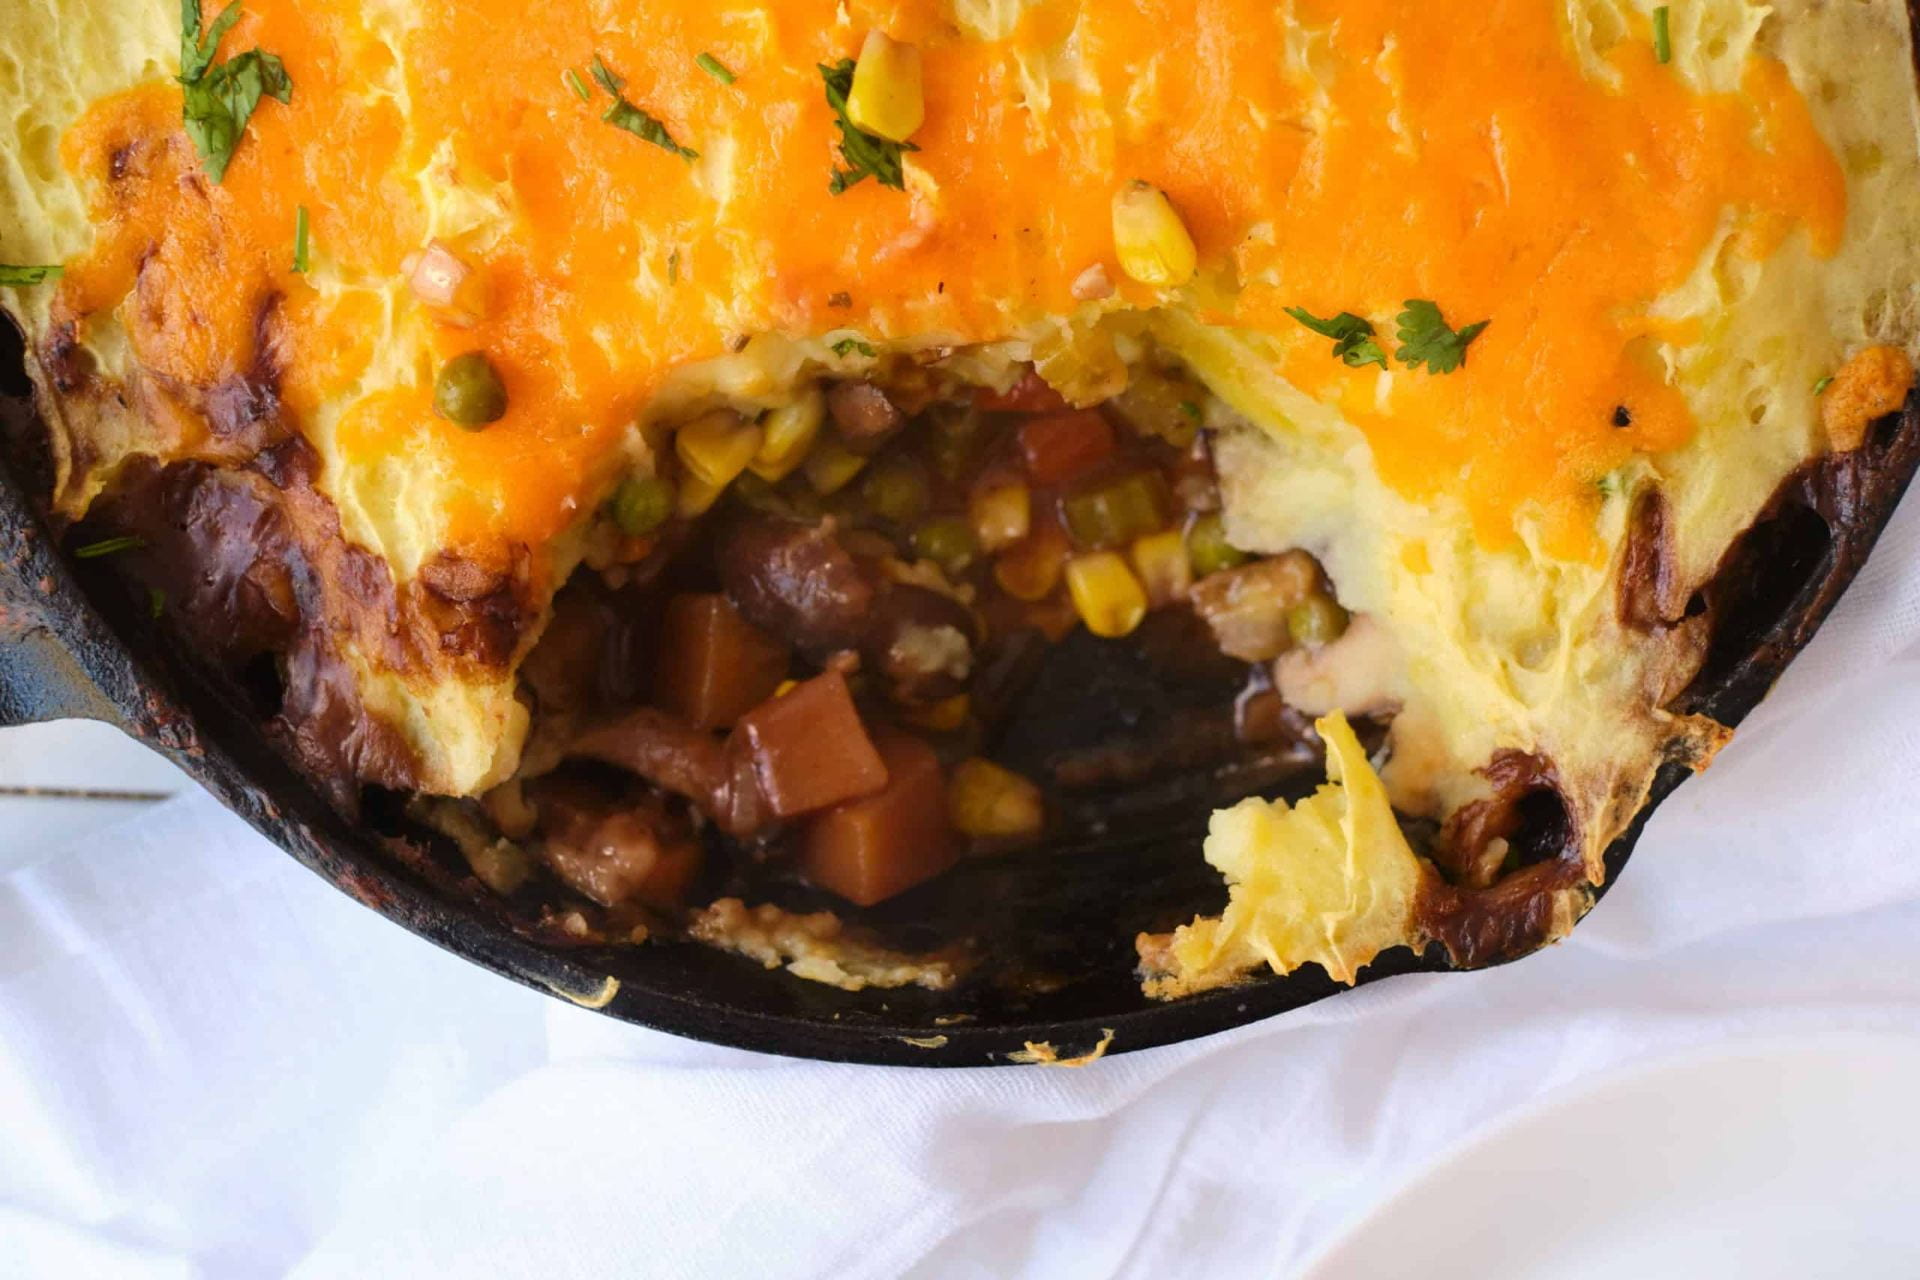 Cast iron pot containing vegetarian shepherd's pie; potato and cheese topping, carrots, beans and corn visible in spooned out section